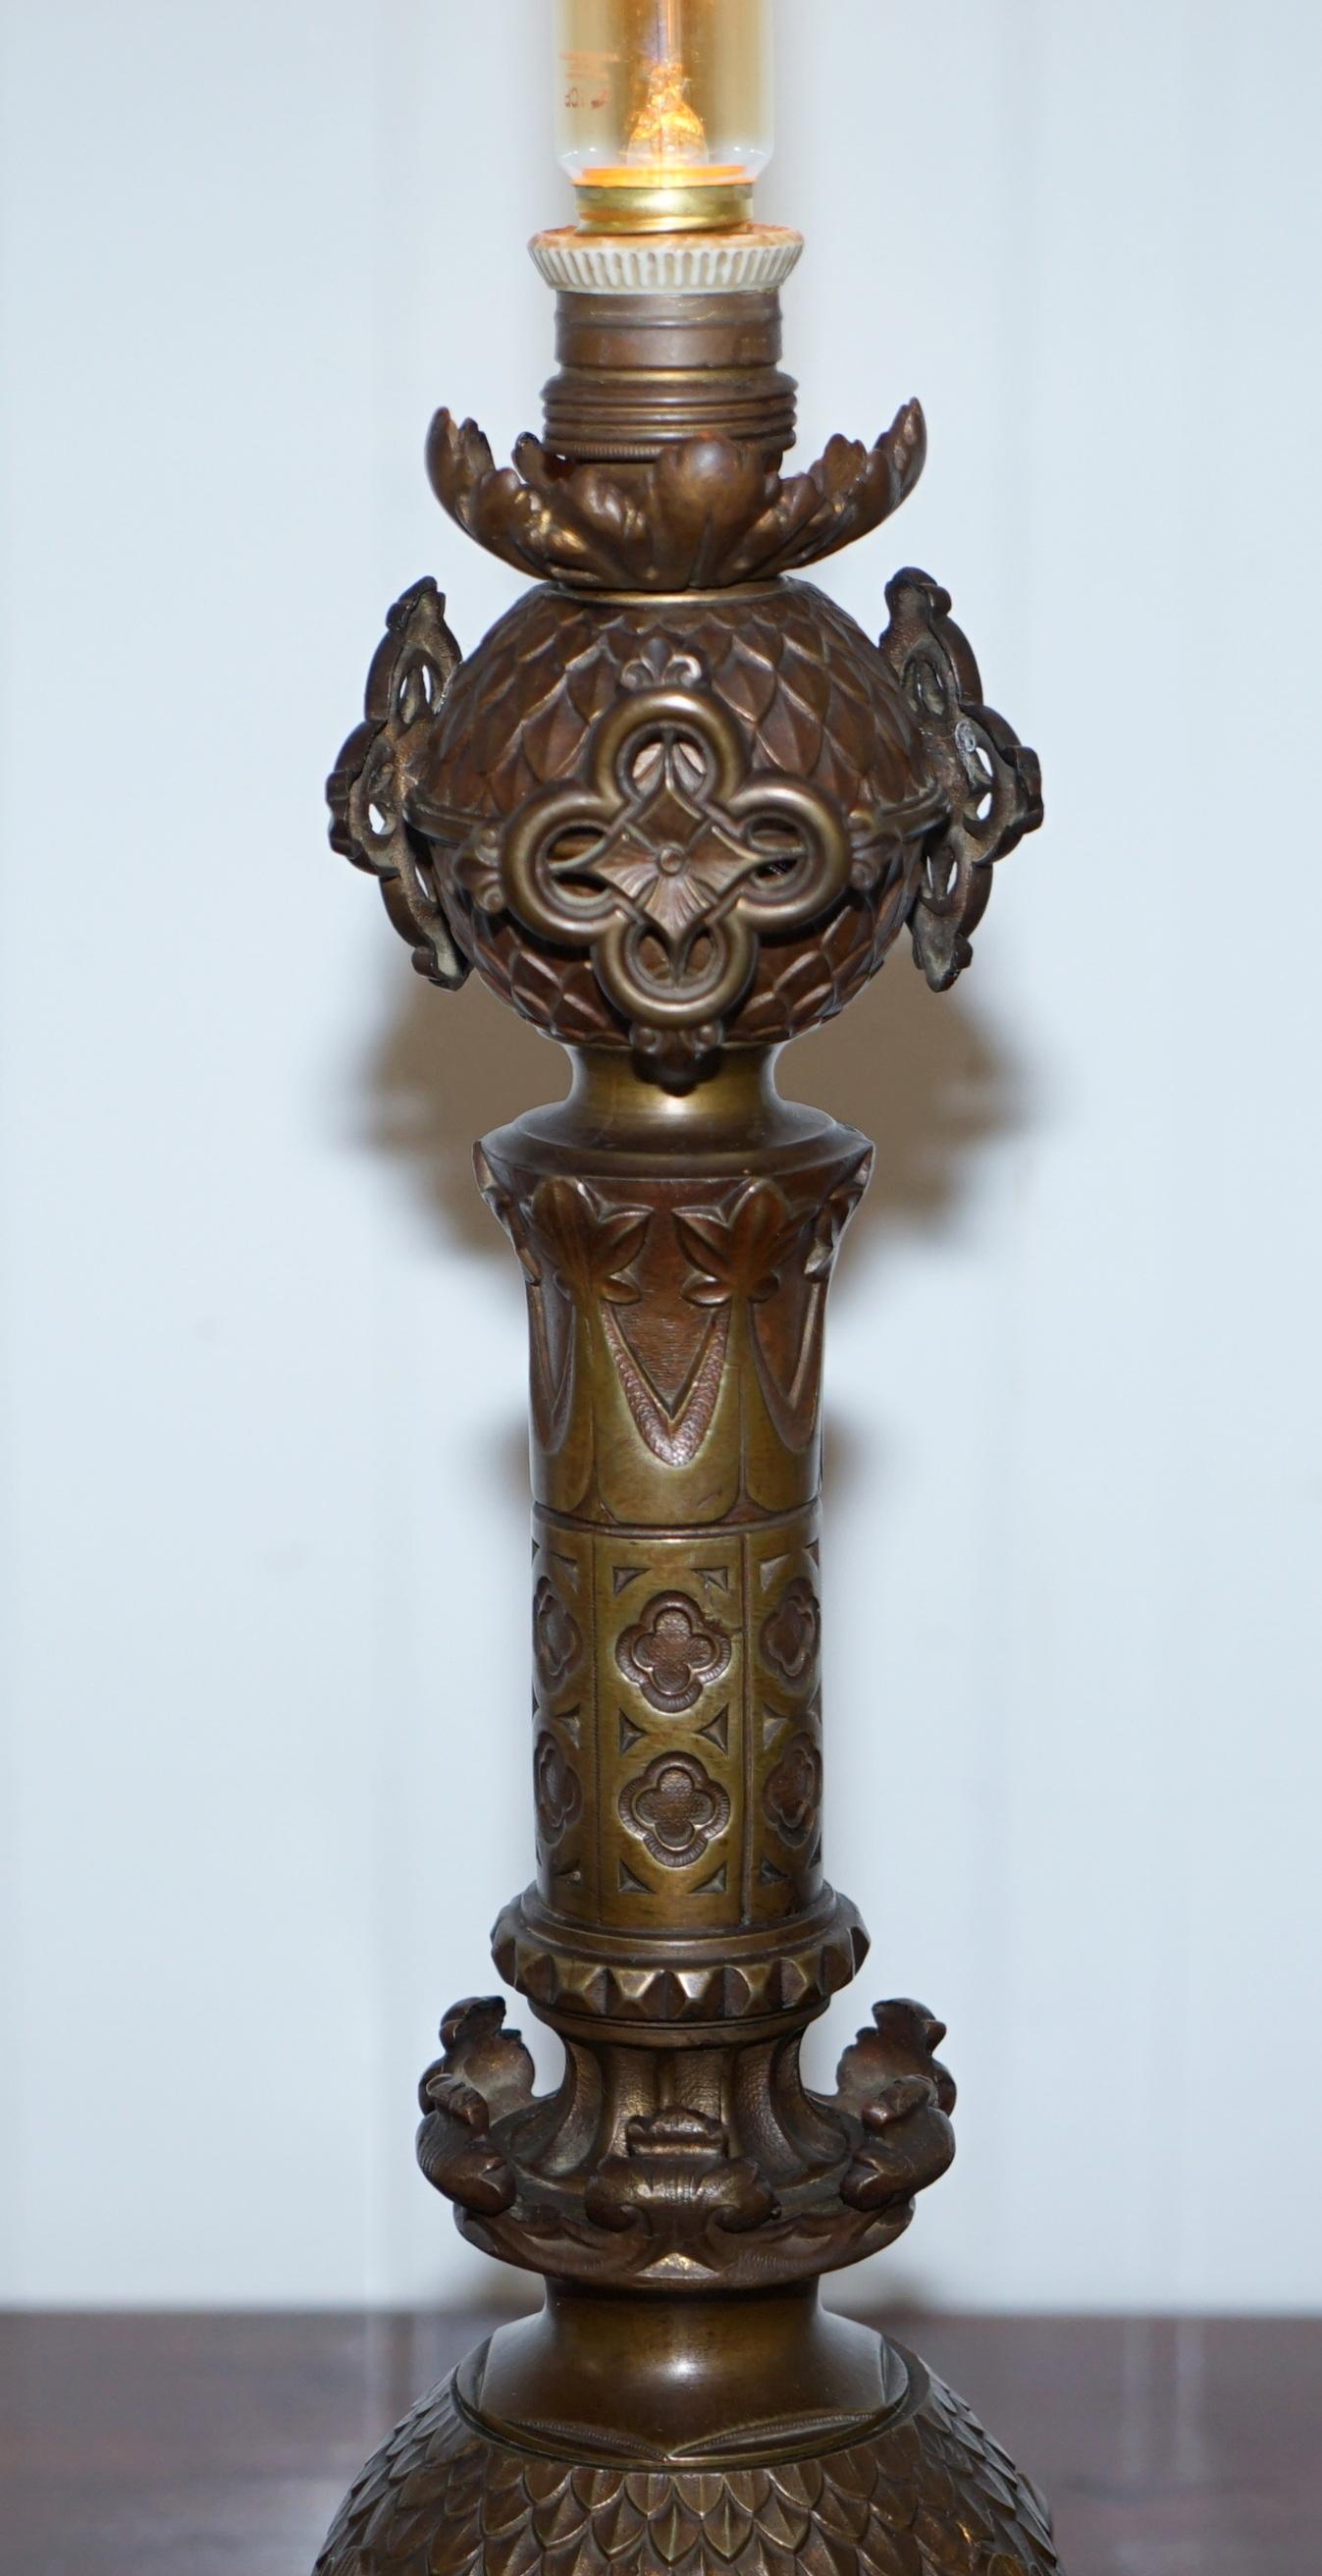 We are delighted to offer for sale this very rare large solid bronze Pugin Gothic style lamp conversion

A stunning piece, it adds style charm and charisma to any setting, the original Pugin's sell in the high thousands, this is in the style of